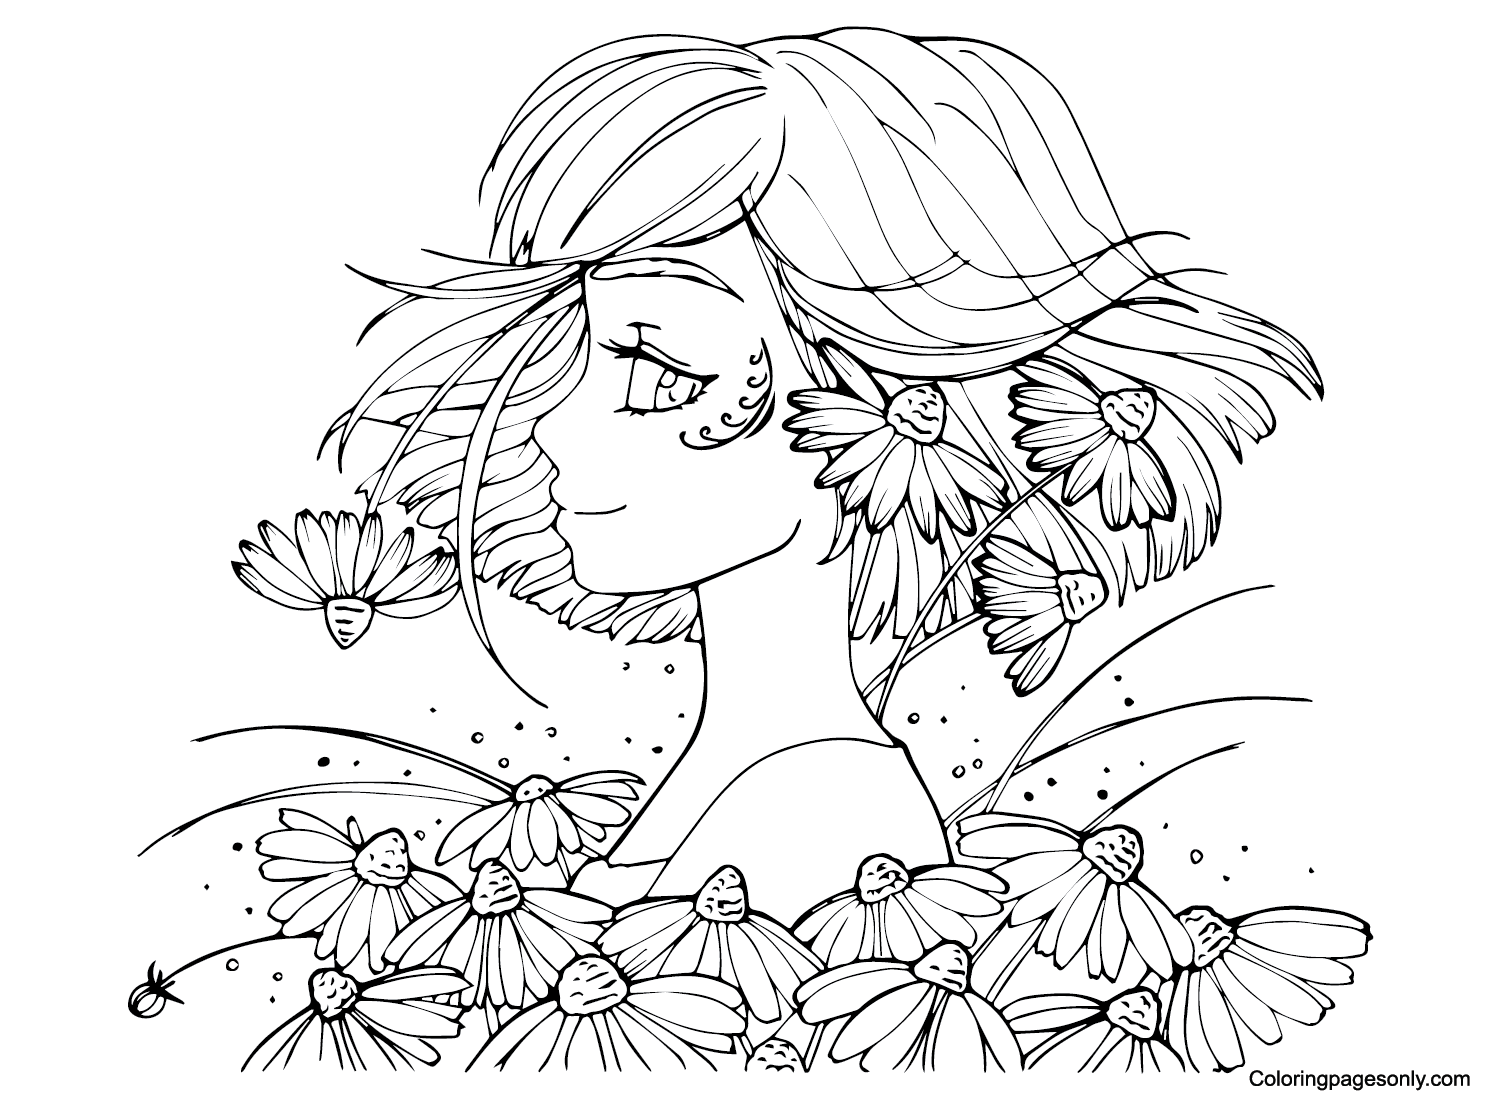 Teenage Girl with Flowers Coloring Pages